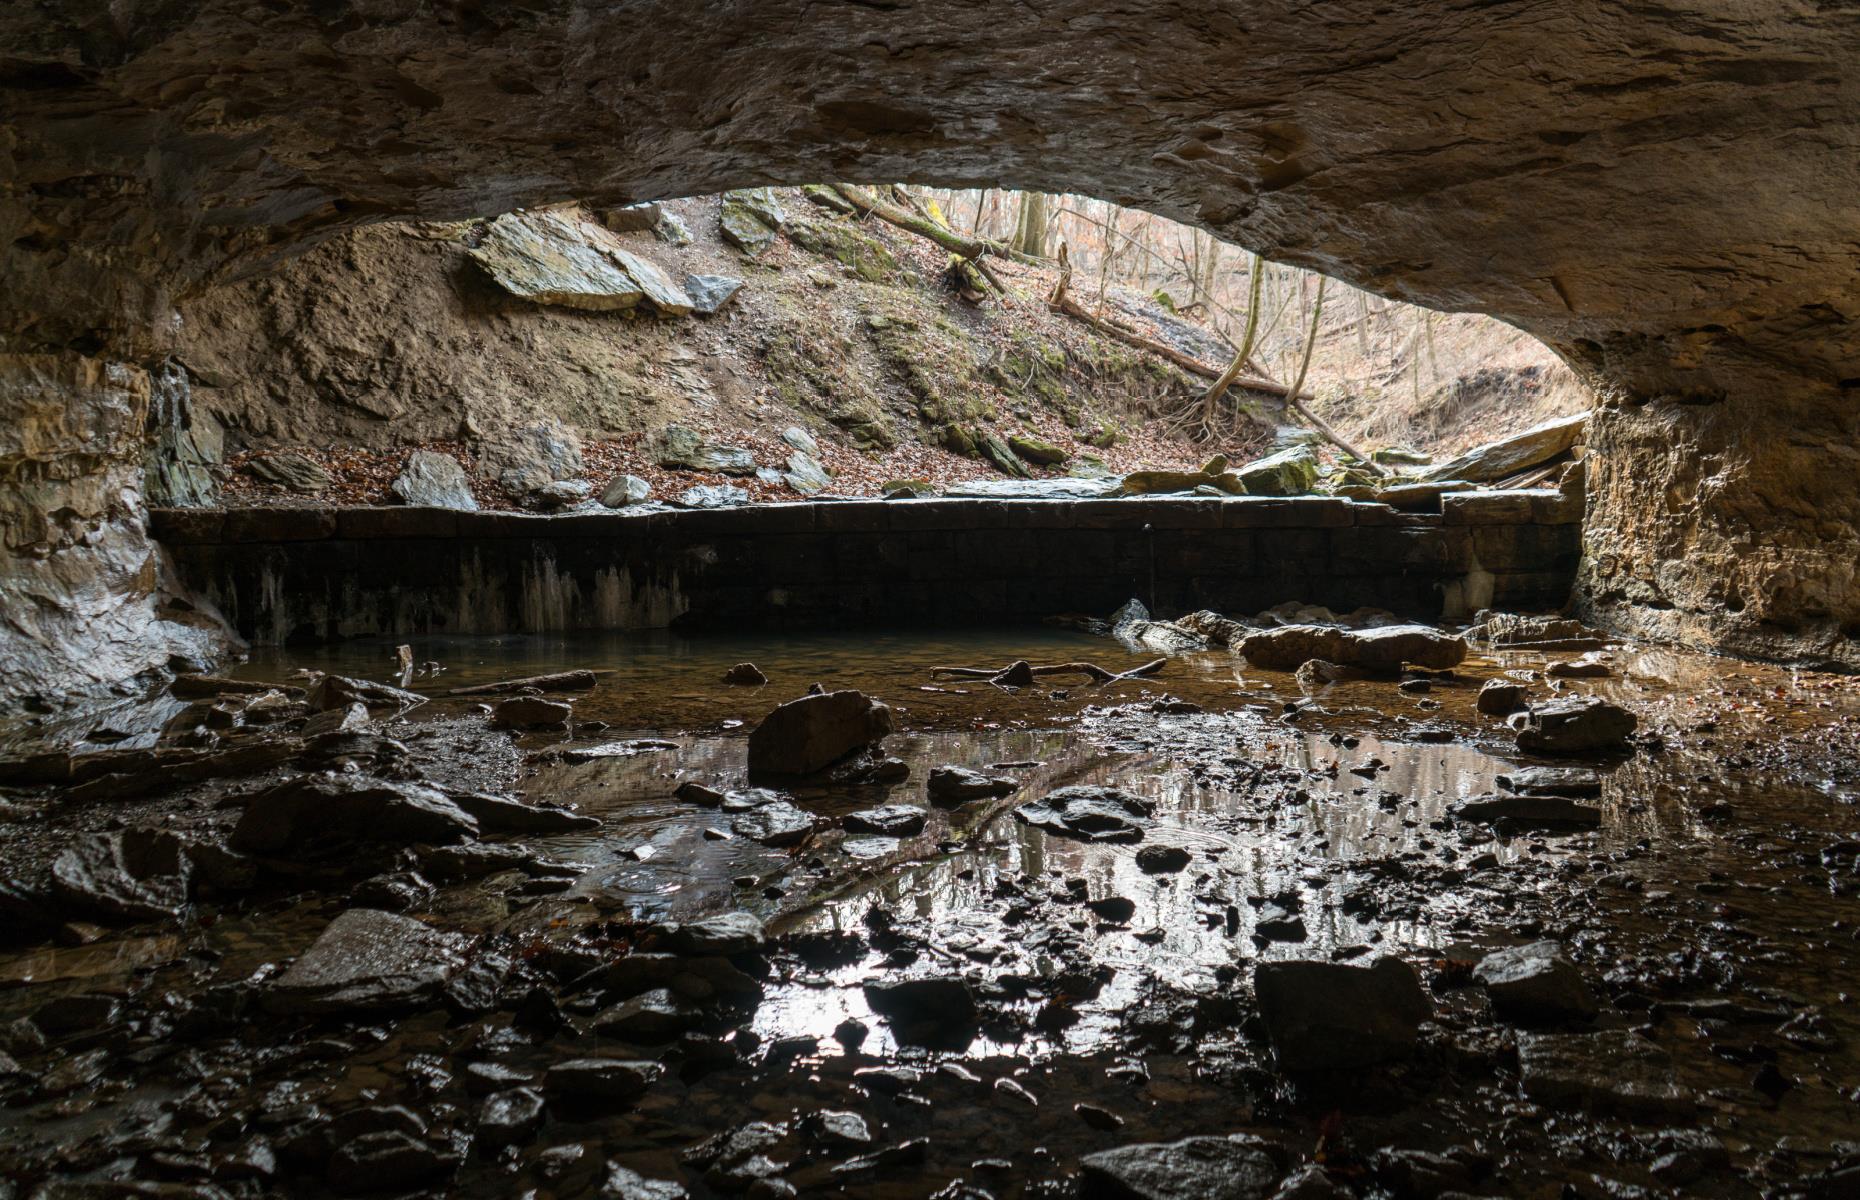 <p>The Ozark region is home to <a href="https://www.fws.gov/arkansas-es/proj_karst.html">a complex karst ecosystem</a> consisting of sinkholes, caves and underground springs that are an important home to at least 60 different varieties of organisms including bats, fish, spiders and salamanders, many of which are protected species. The karst system is also responsible for many of the area’s pristine streams and ground water supply.</p>  <p><strong><a href="https://www.loveexploring.com/galleries/68414/americas-underground-attractions-you-didnt-know-existed">Check out more of America's underground attractions</a></strong></p>